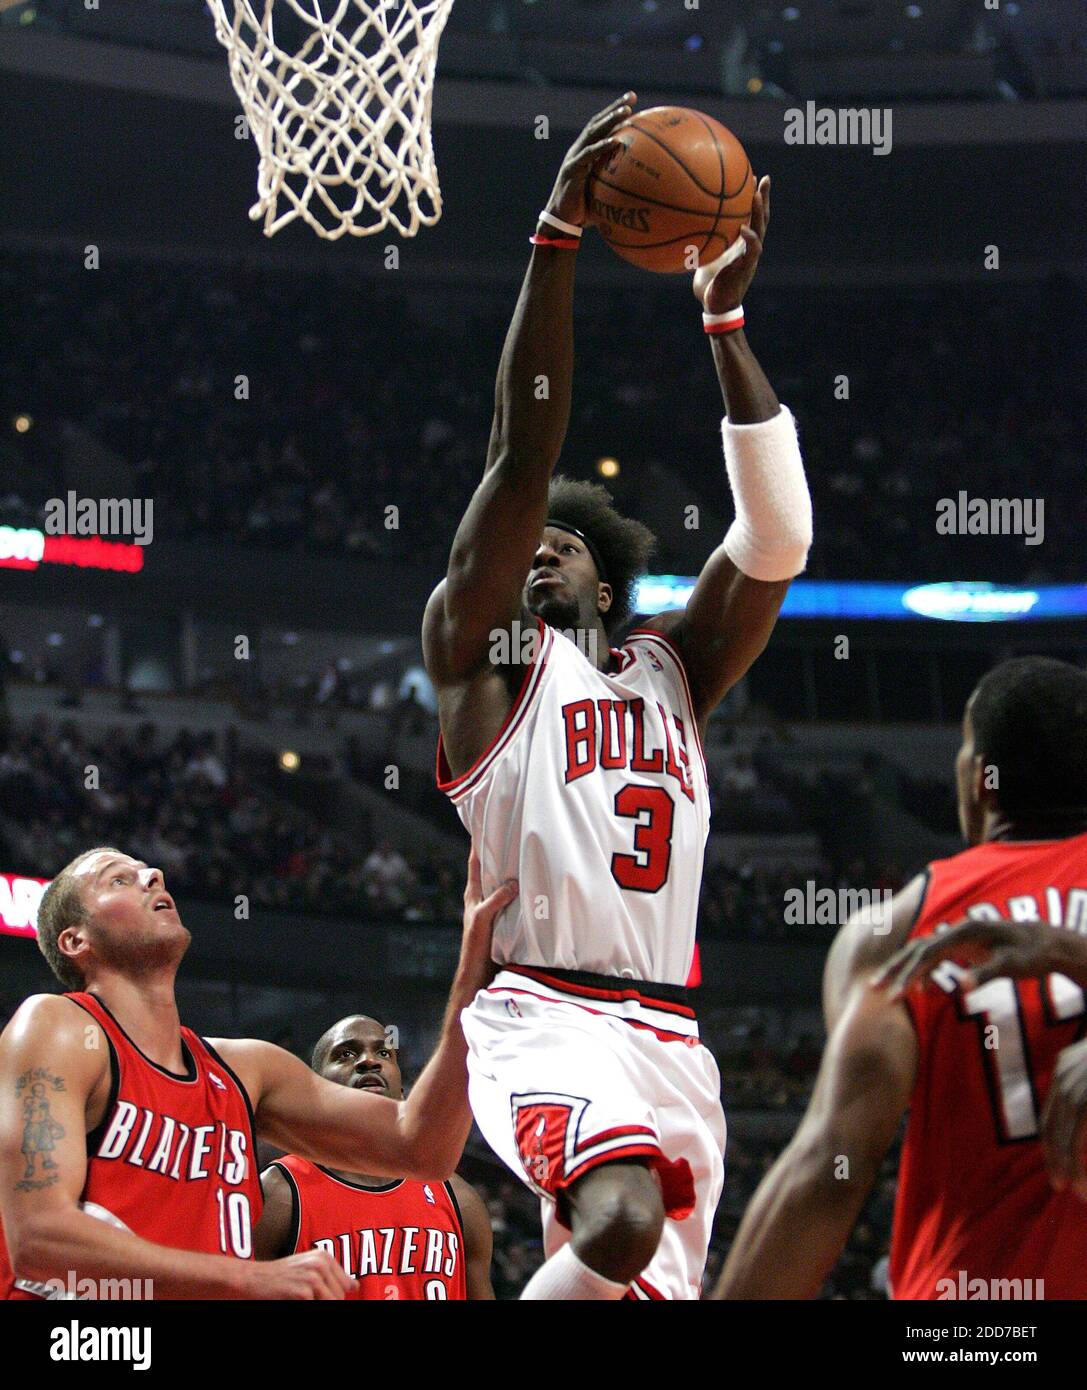 Chicago Bulls' Ben Wallace drives to the hoop against the Portland Trailblazers at the United Center in Chicago, IL, USA on January 3, 2008 . Portland Trailblazers won 115-109. Photo by Charles Cherney/Chicago Tribune/MCT/Cameleon/ABACAPRESS.COM Stock Photo